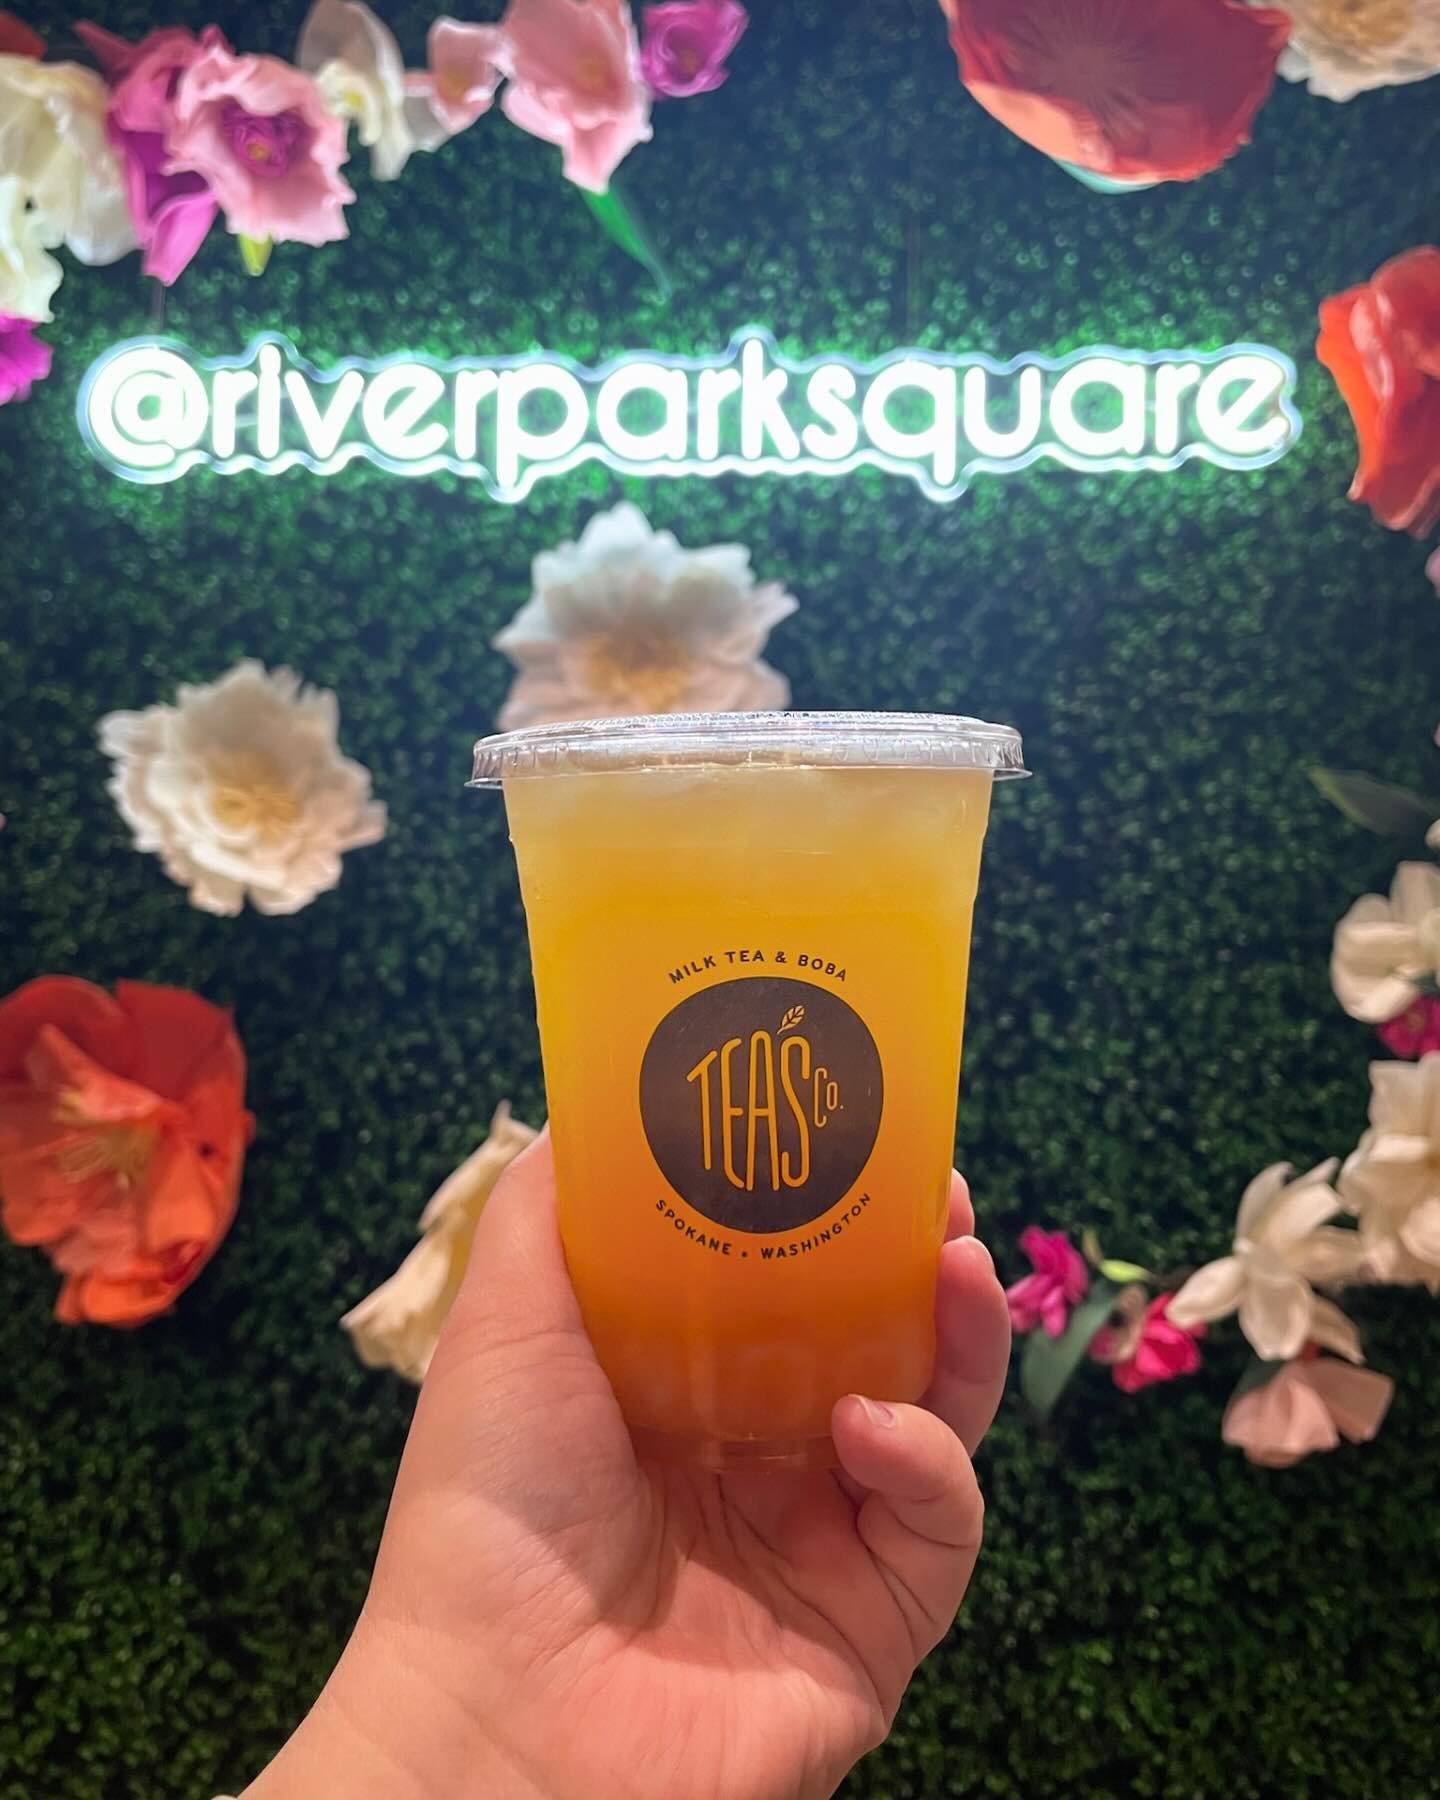 Planning on heading to River Park Square this weekend? Stop by to grab a drink!